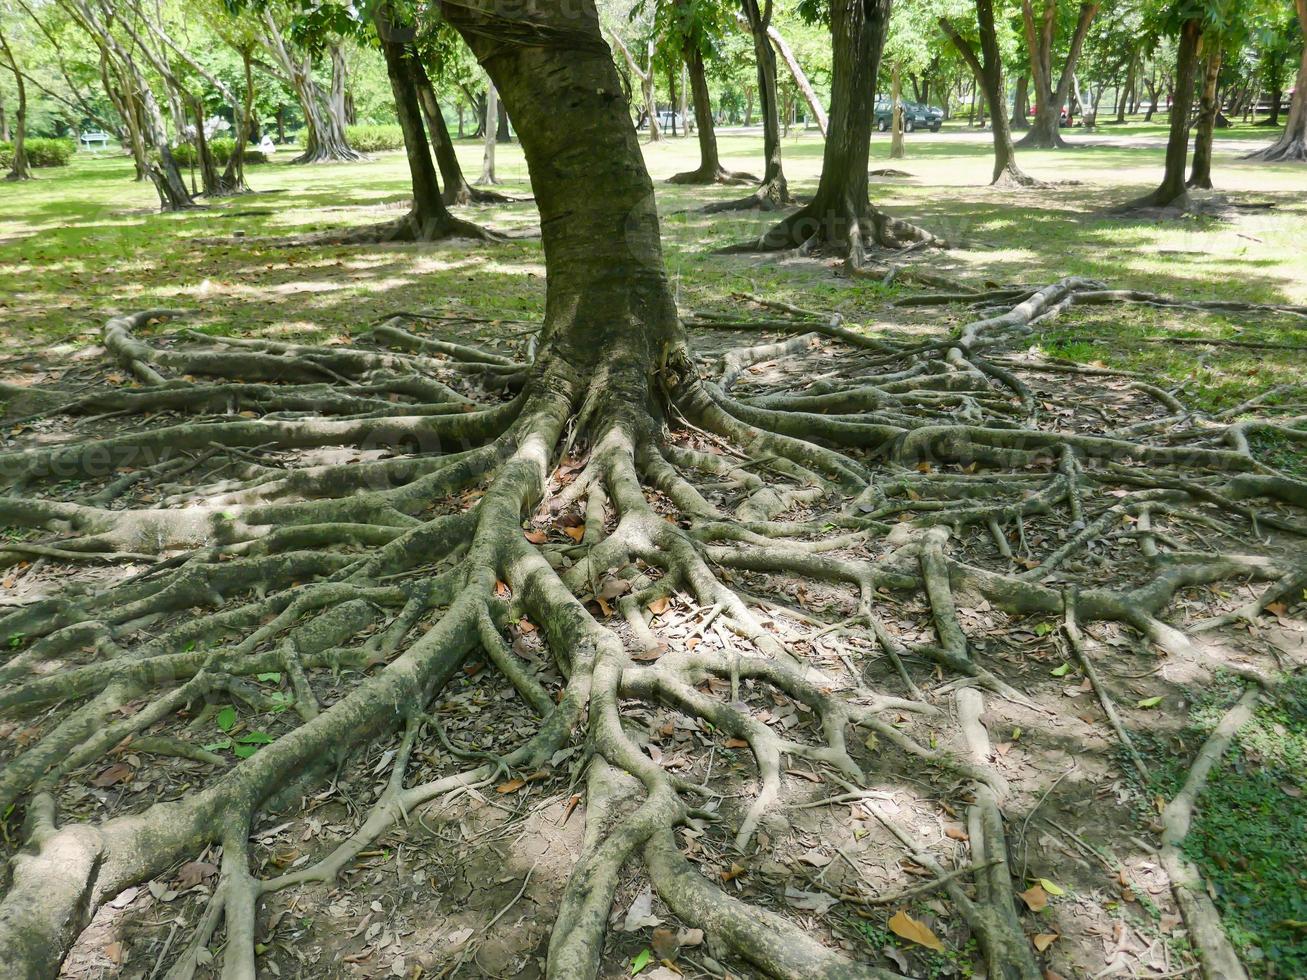 A large tree with roots covering the ground, a large tree in the garden photo